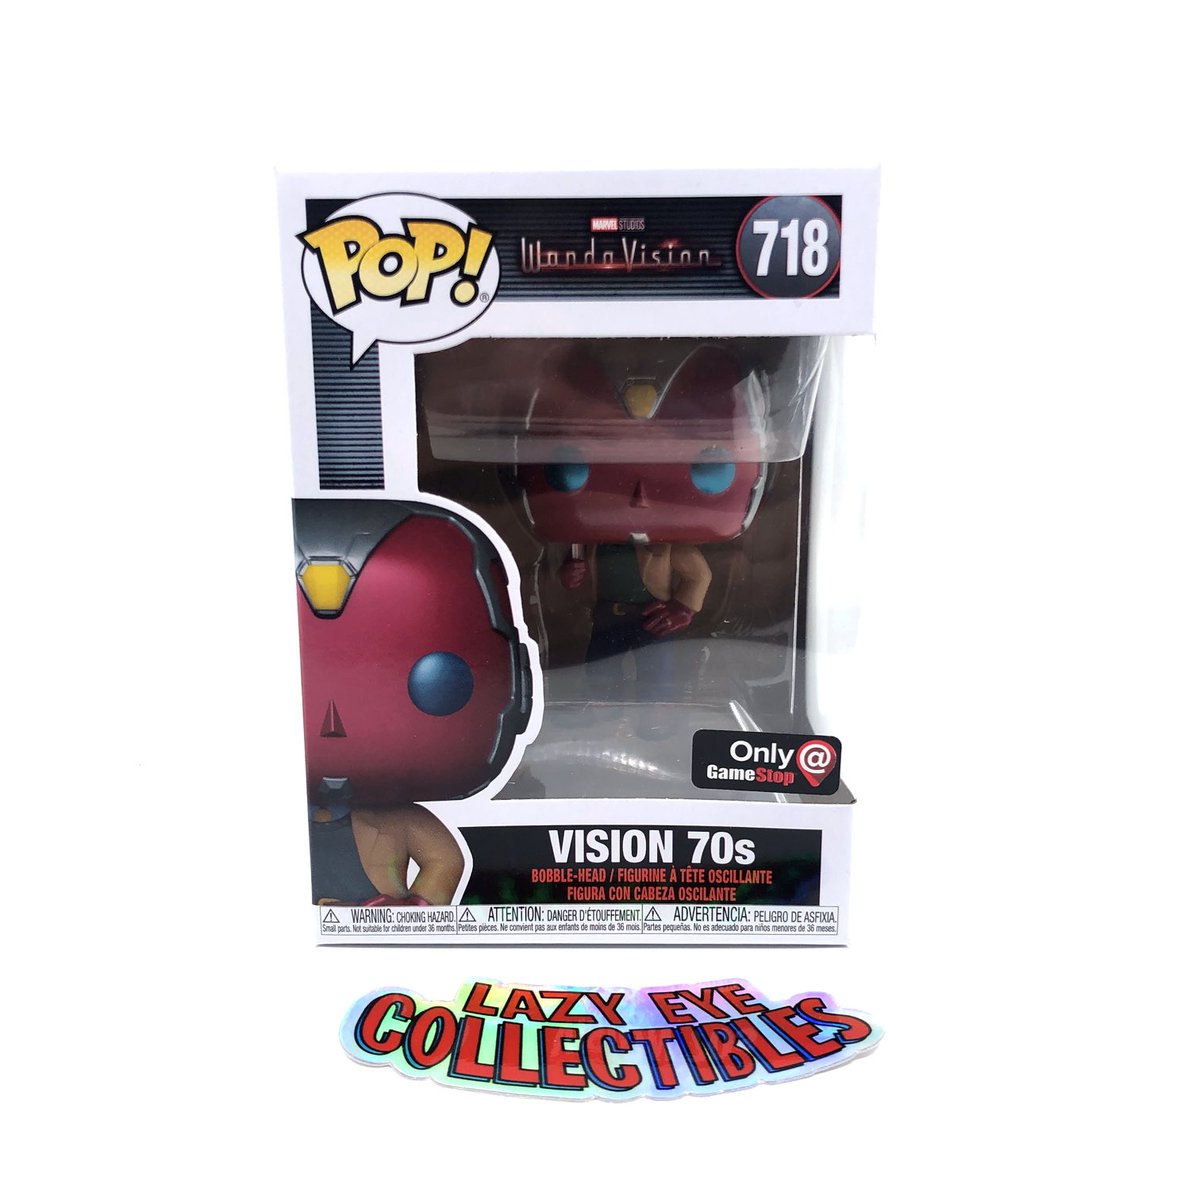 Have you been enjoying  #RonsMCURecap for  #WandaVision  ? Do you like free stuff? If you do, go ahead and RT this tweet and follow  @lazyeyecollect for a chance to win this Vision 70s exclusive Funko pop! Episode 4 recap and analysis dropping today!